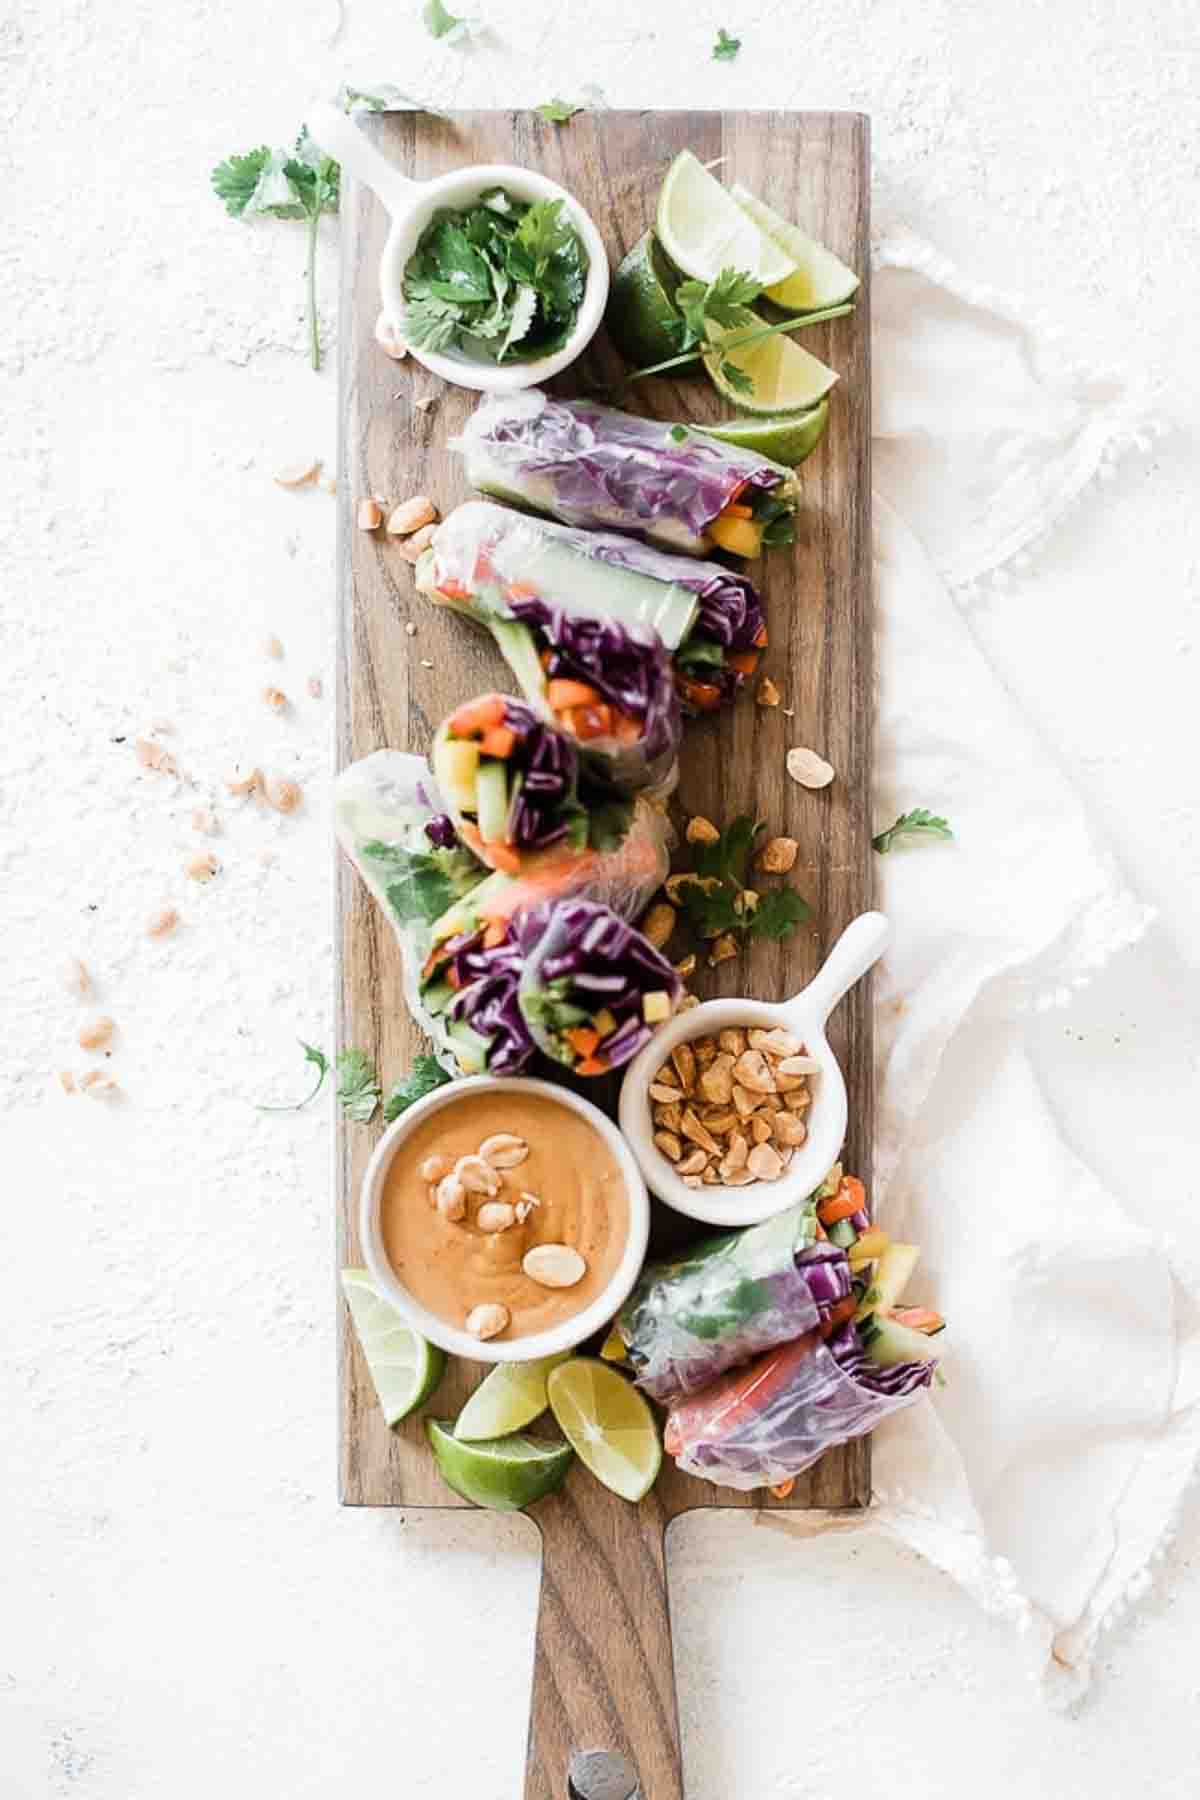 Rice paper rolls arranged on a wooden cutting board with bowl of peanut dipping sauce and peanuts to the side.